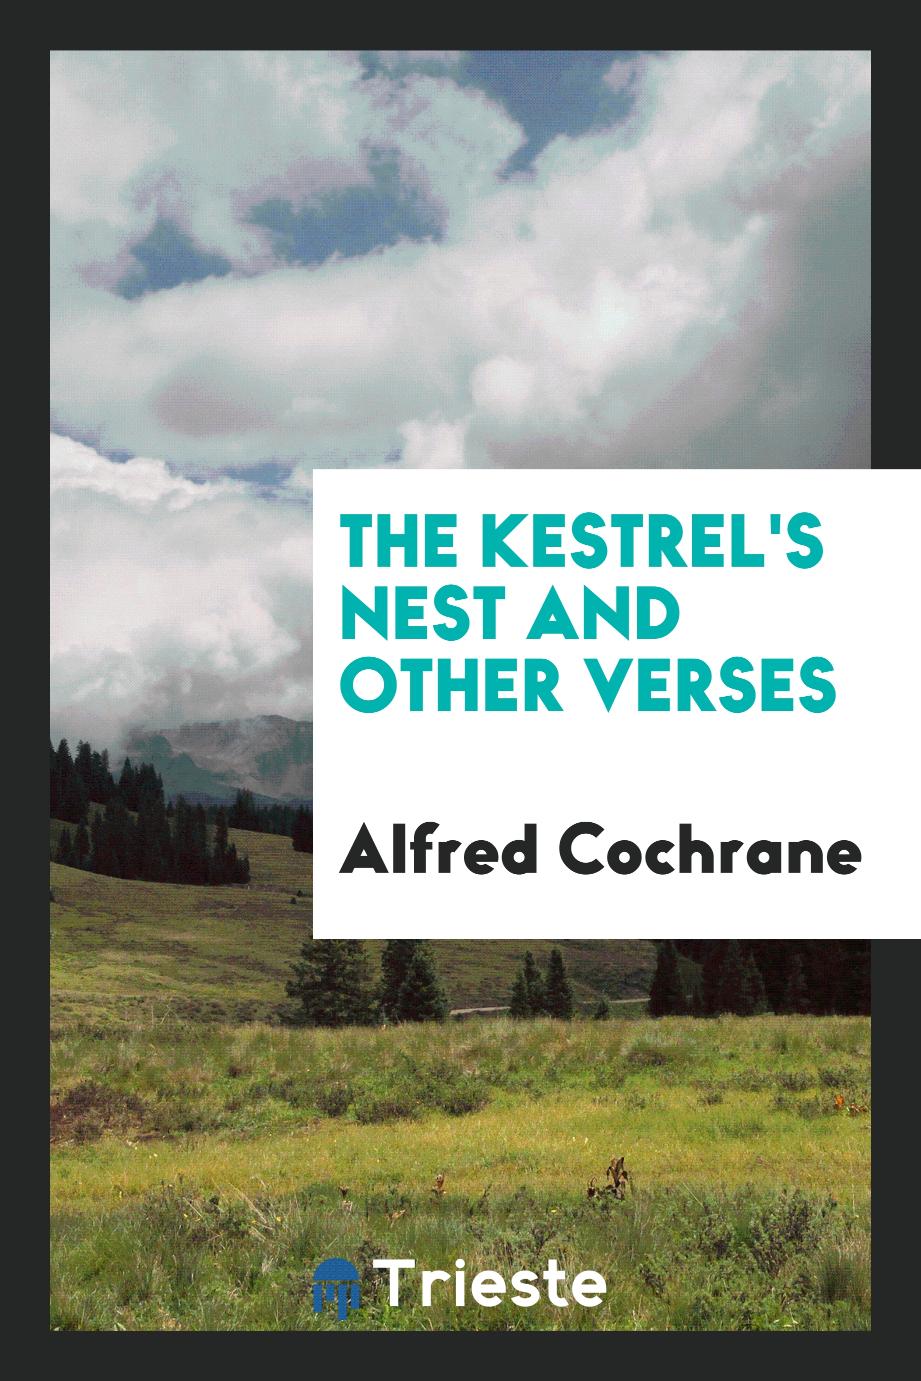 The Kestrel's Nest and Other Verses